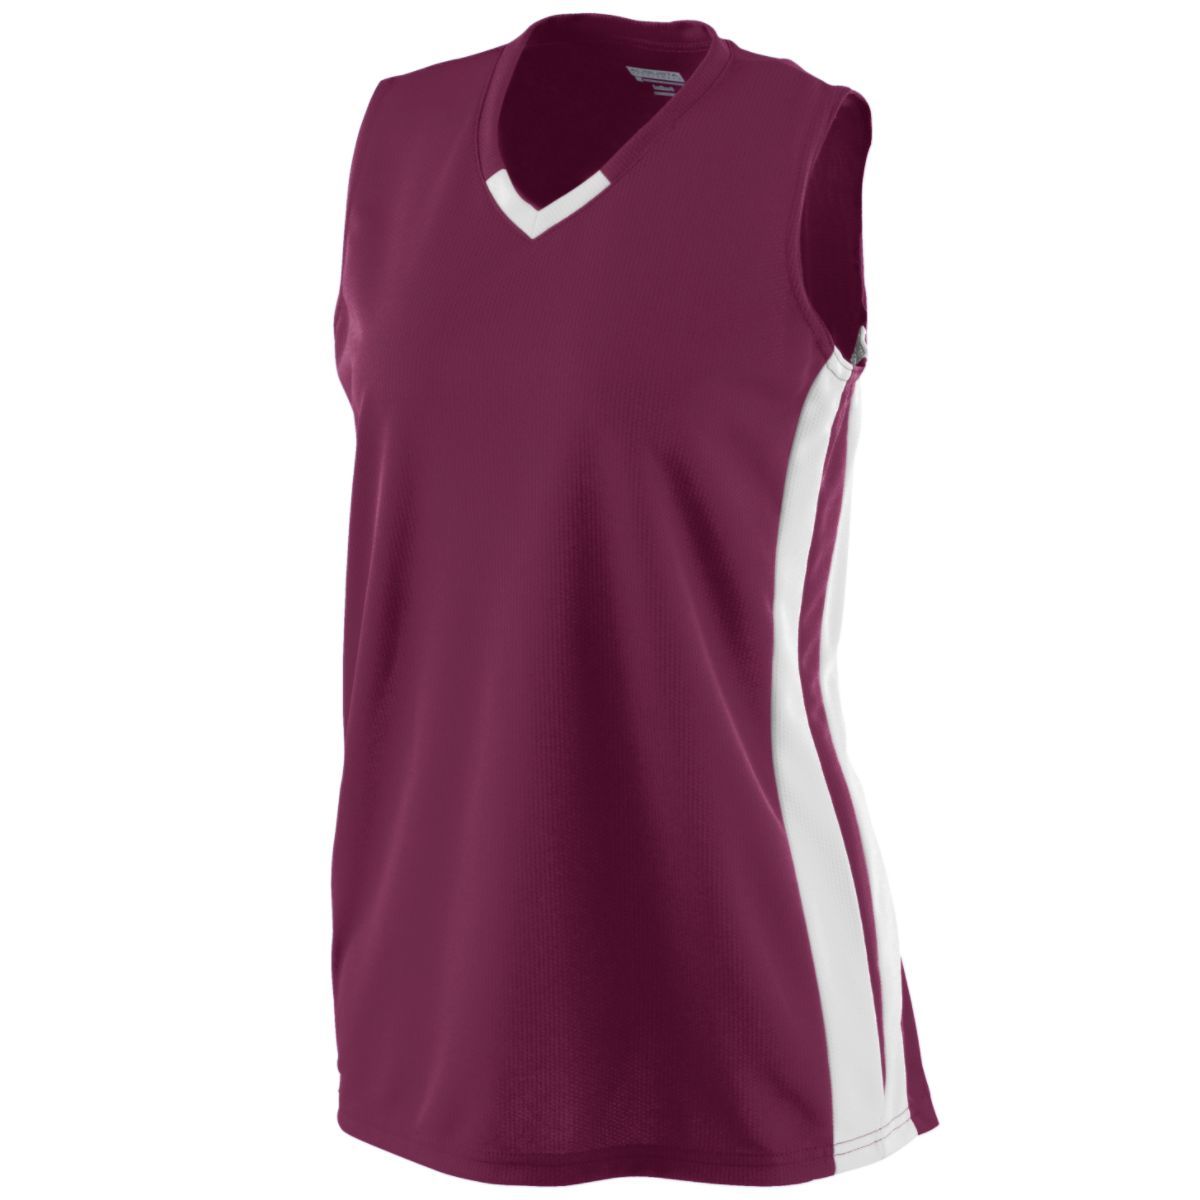 Augusta Sportswear Girls Wicking Mesh Powerhouse Jersey in Maroon/White  -Part of the Girls, Augusta-Products, Softball, Girls-Jersey, Shirts product lines at KanaleyCreations.com